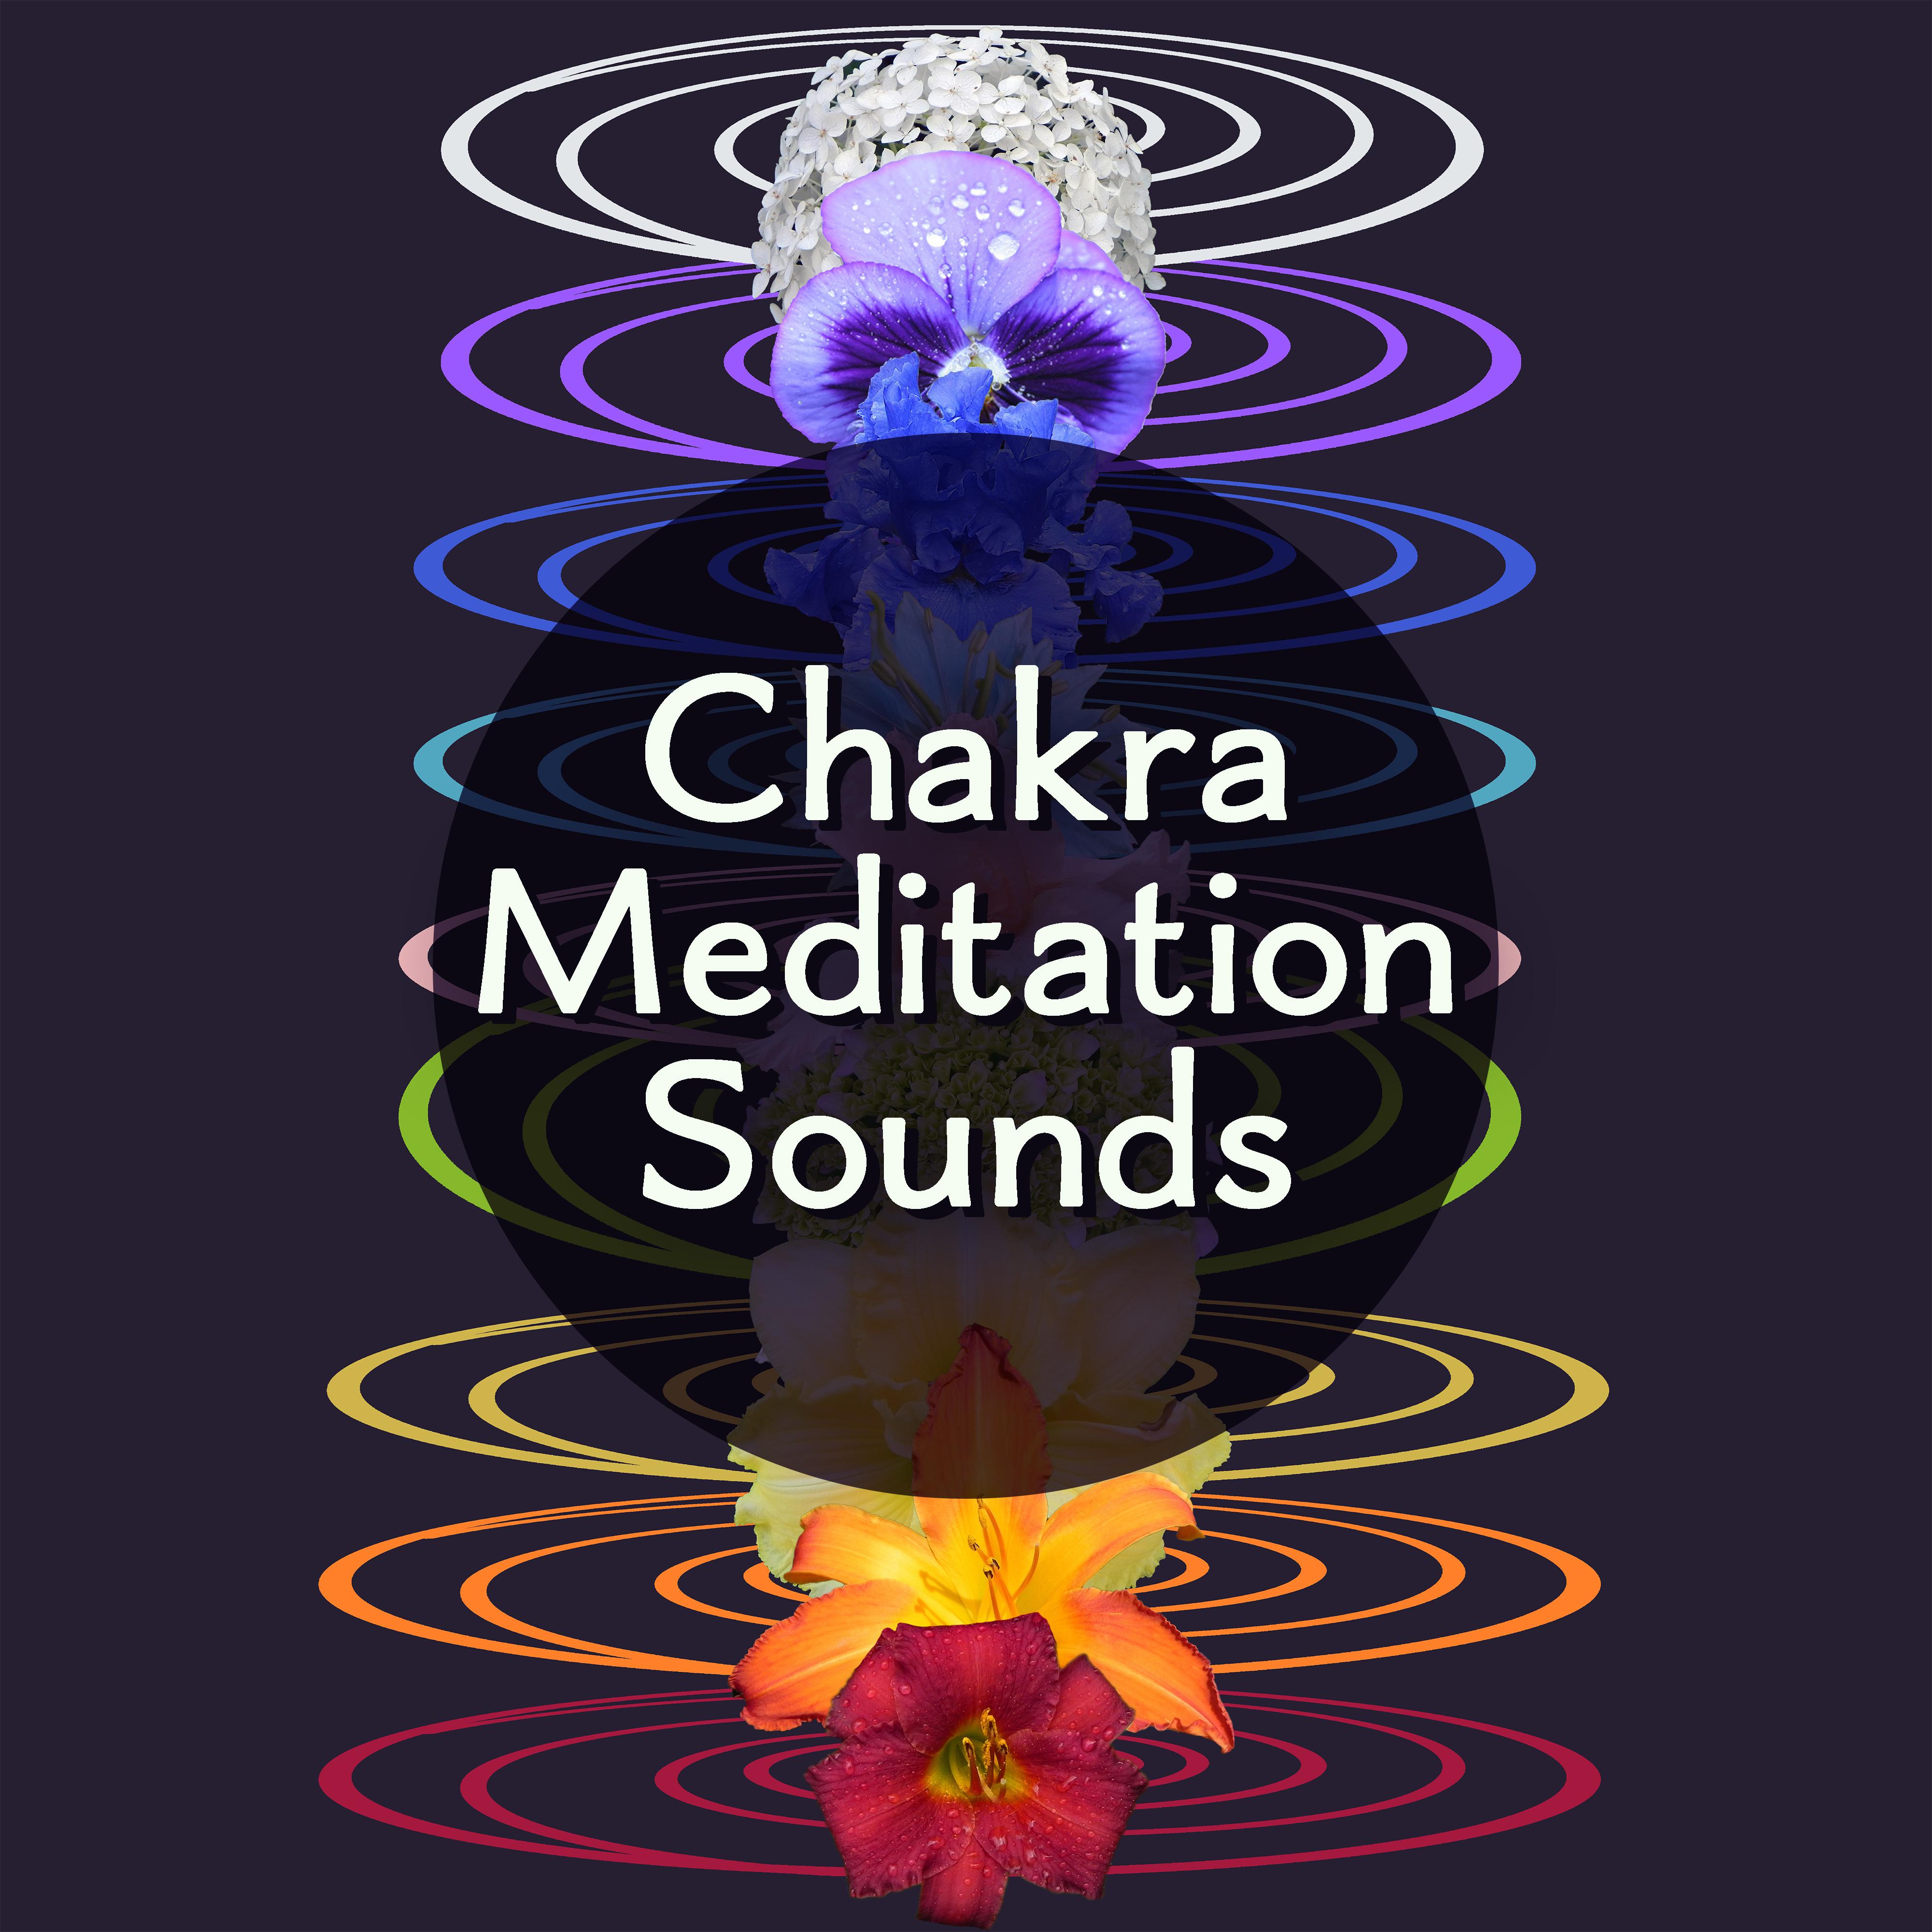 Chakra Meditation Sounds – Meditate & Relax, Rest with New Age Music, Chilled Songs, Buddha Lounge